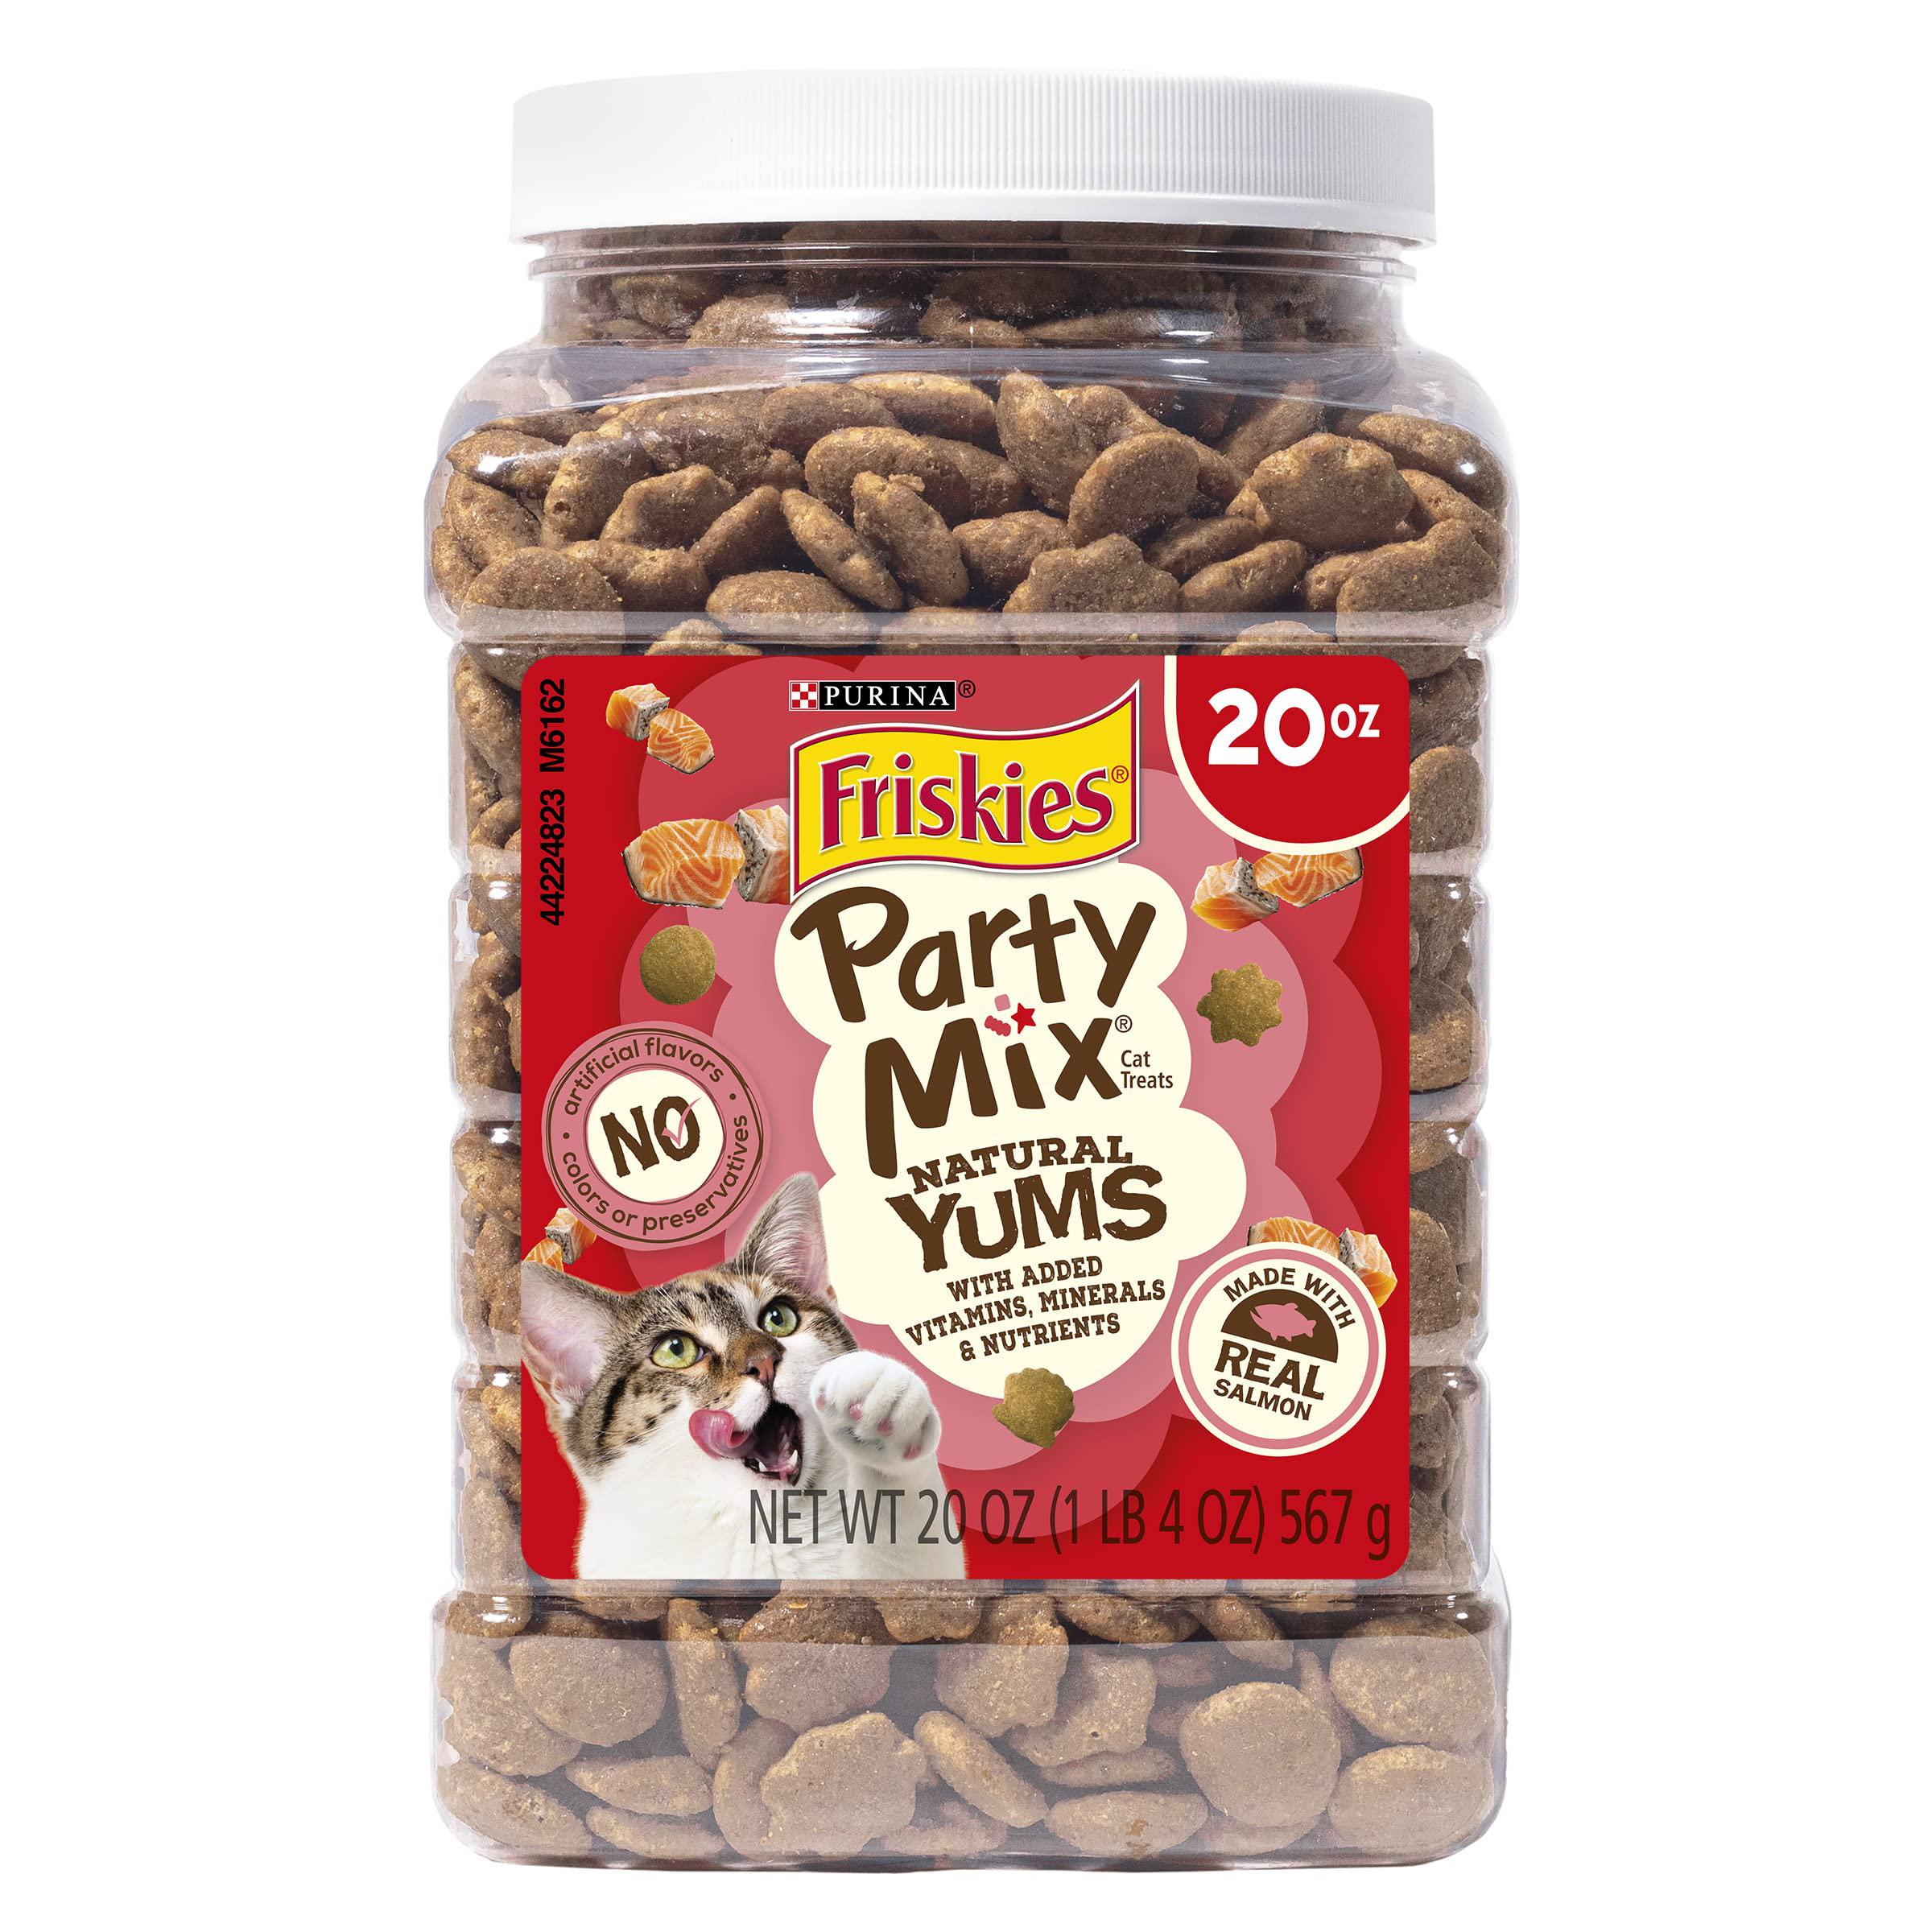 Friskies purina friskies natural cat treats party mix natural yums with real salmon and added vitamins, minerals and nutrients - 20 oz